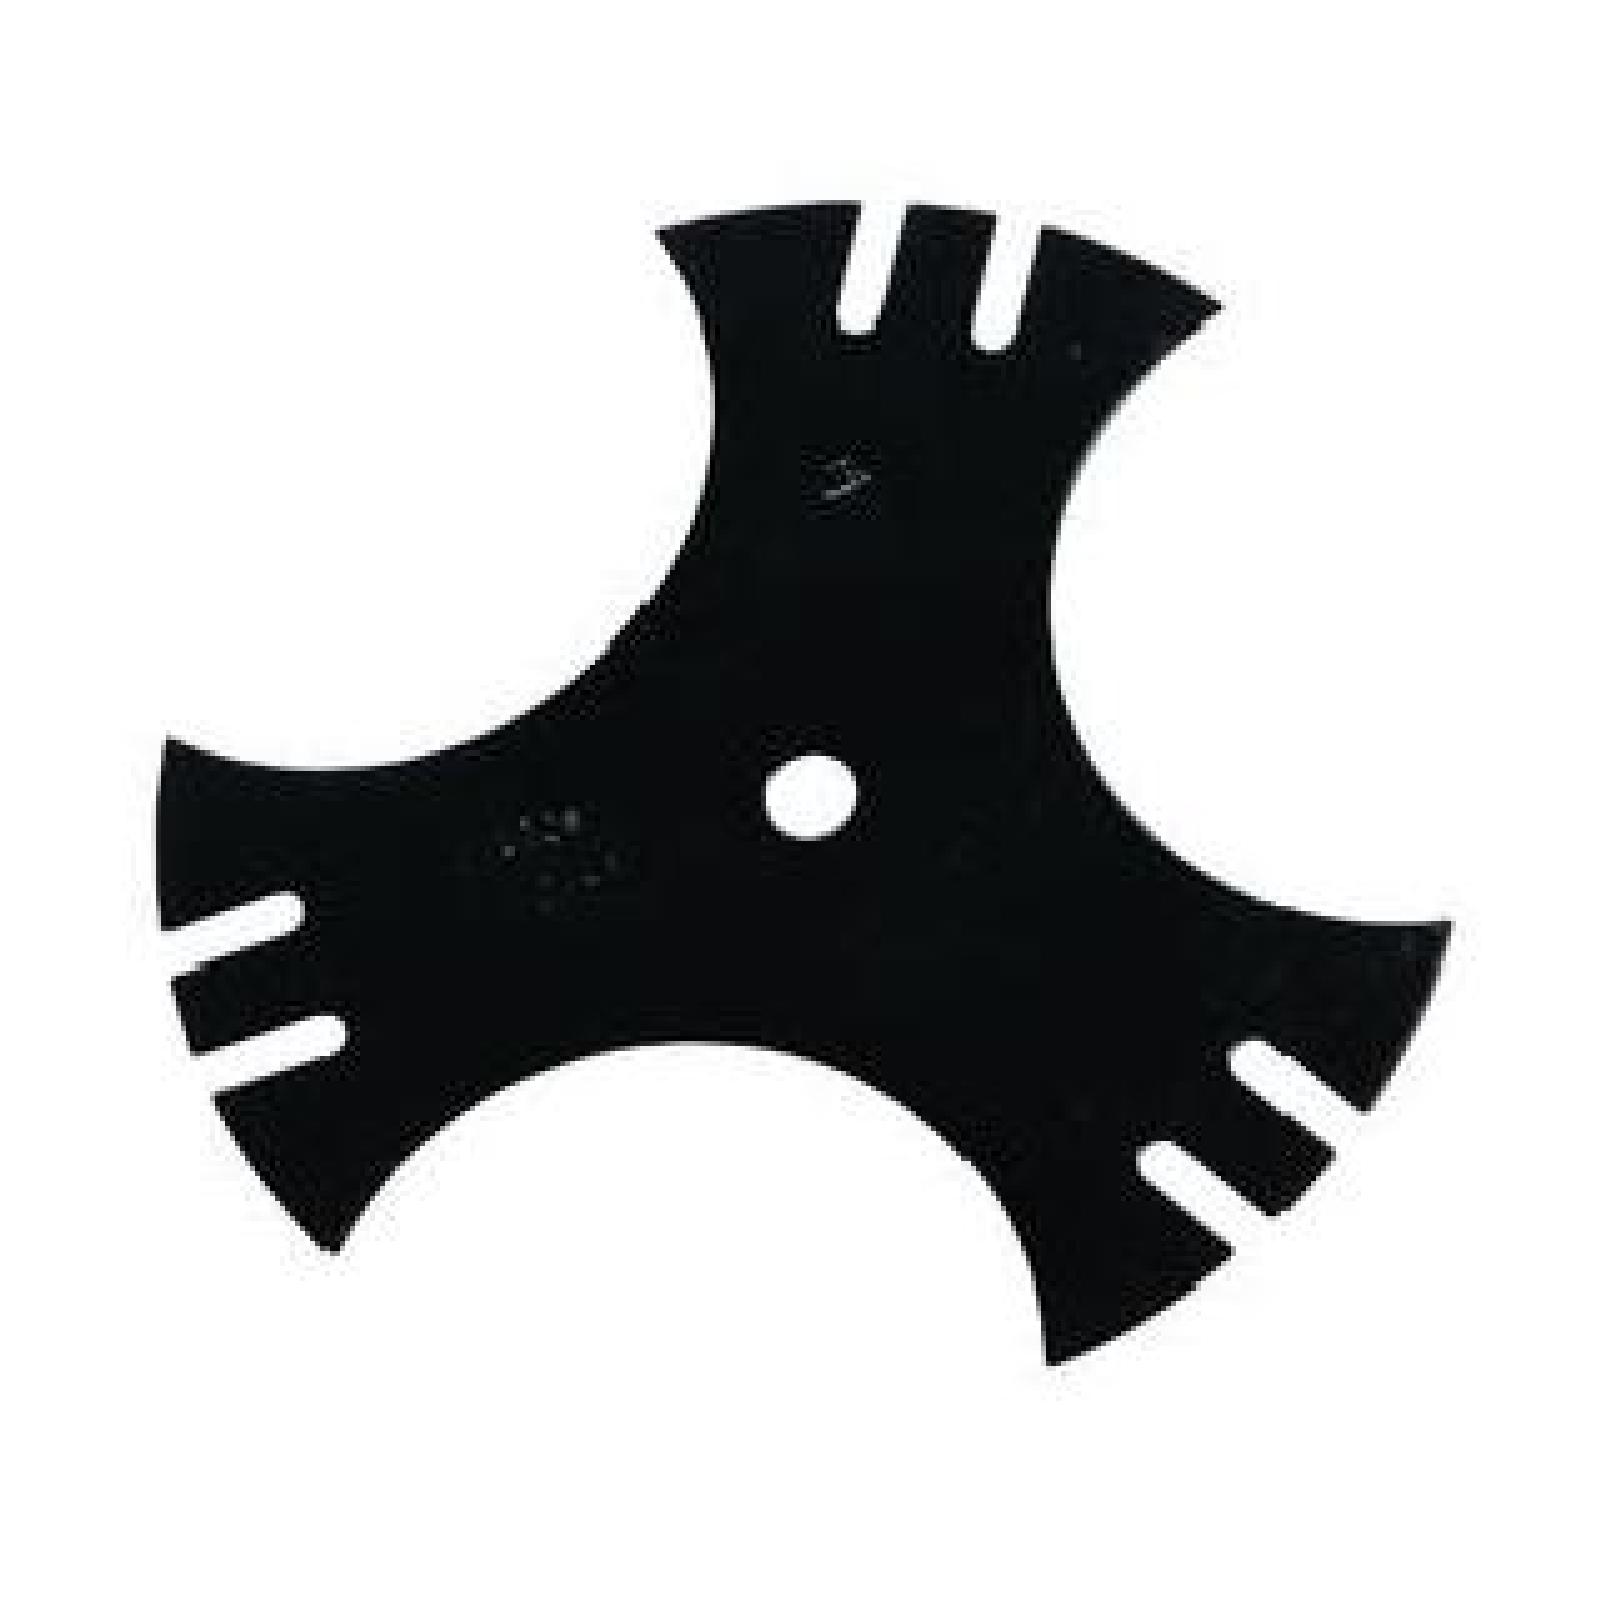 EDGER BLADE9IN X 5/8 3-TOOTH part# 40-009 by Oregon - Click Image to Close